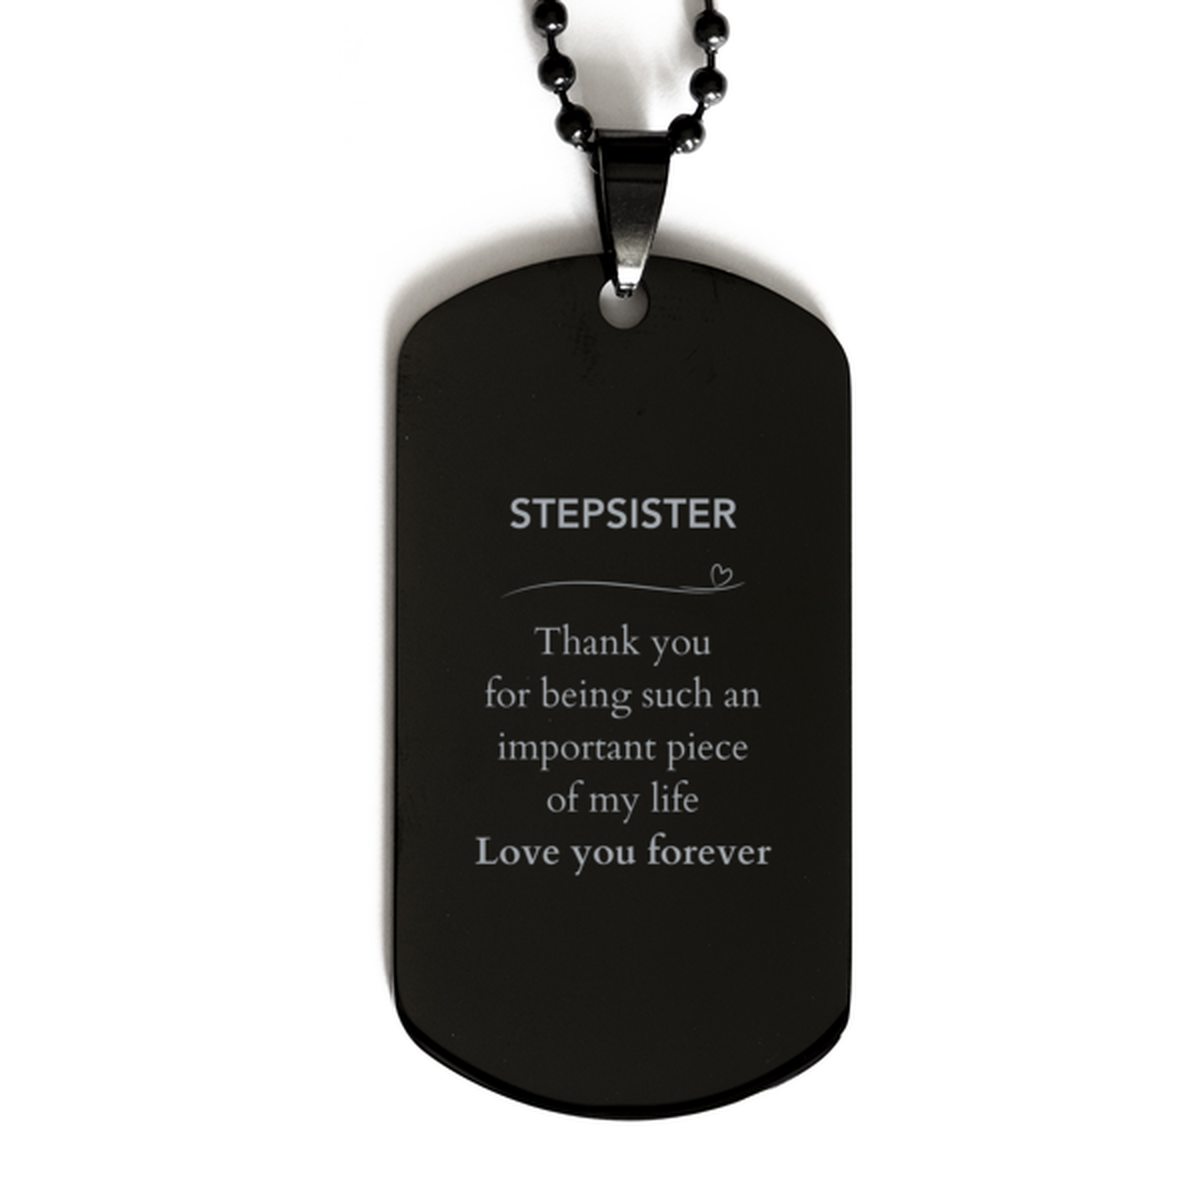 Appropriate Stepsister Black Dog Tag Epic Birthday Gifts for Stepsister Thank you for being such an important piece of my life Stepsister Christmas Mothers Fathers Day